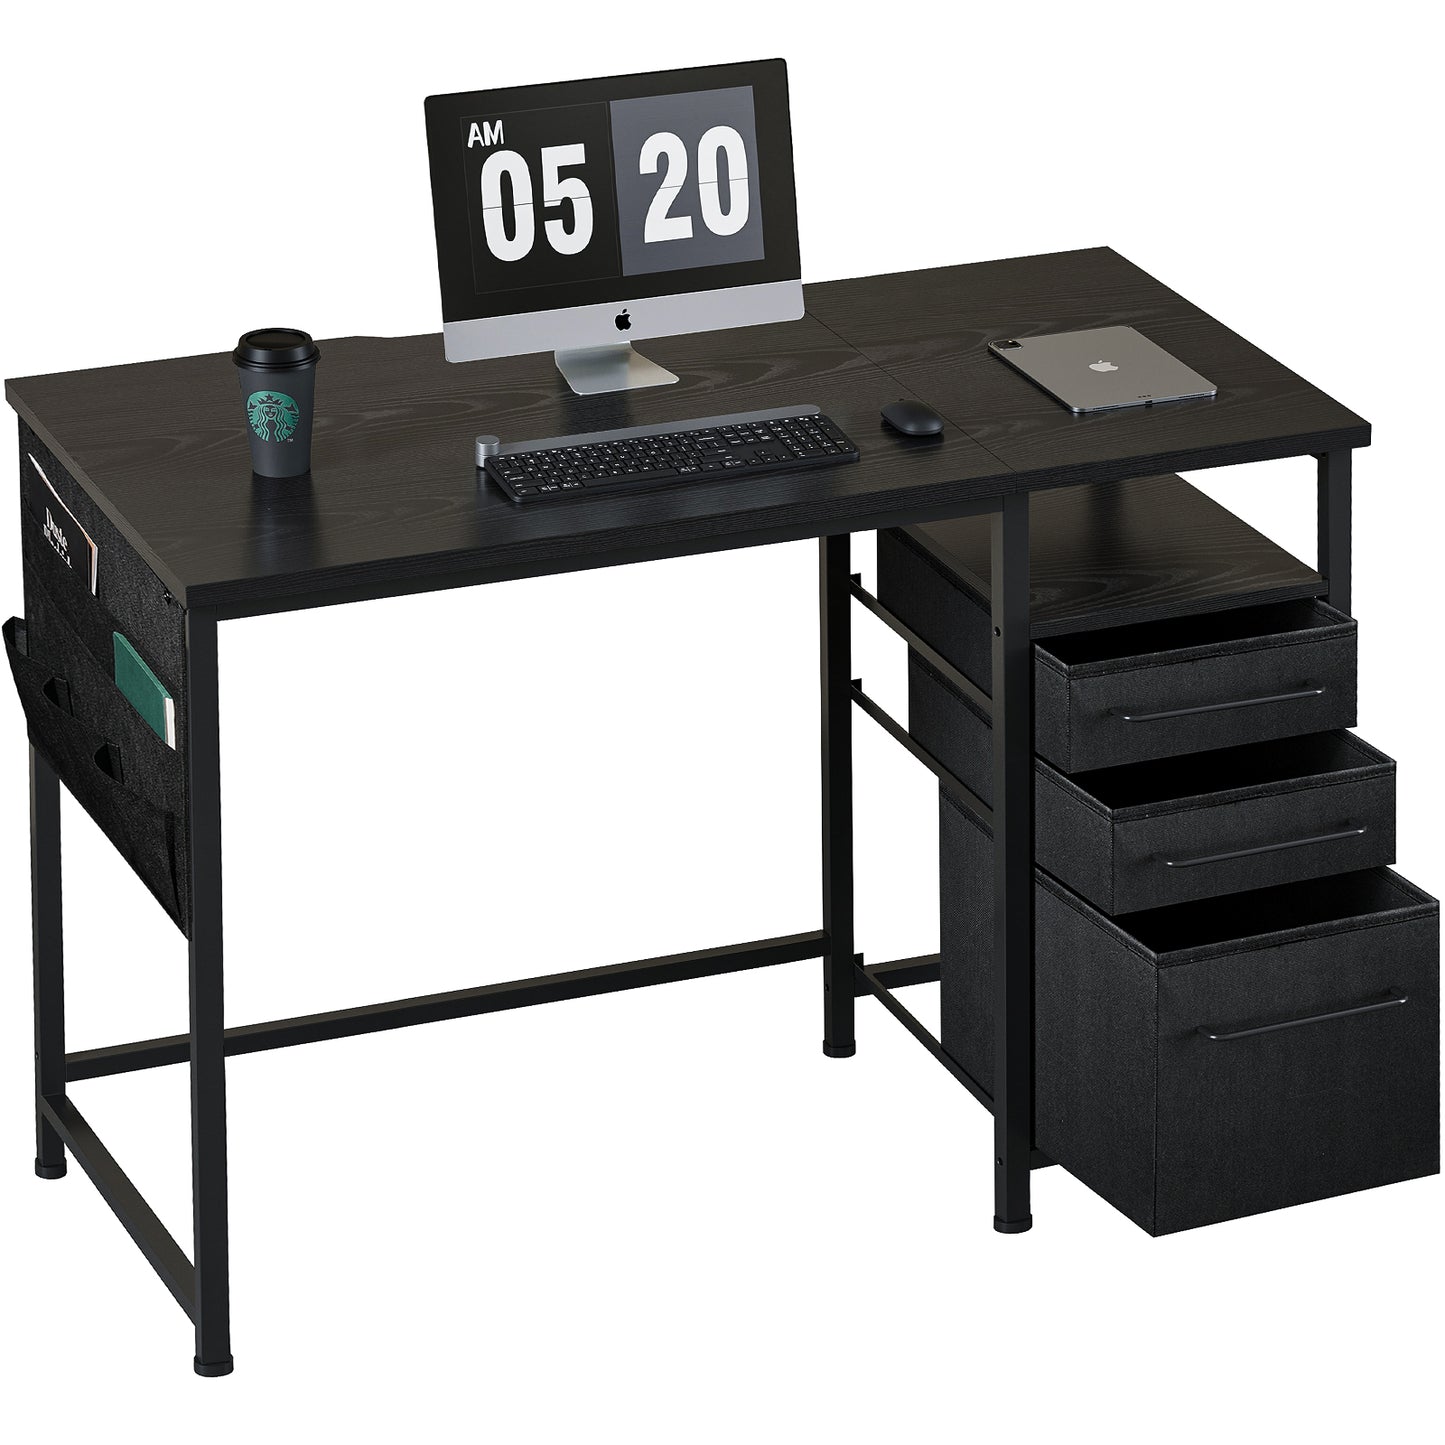 MAIHAIL 40 inch Desk with Drawers, Black